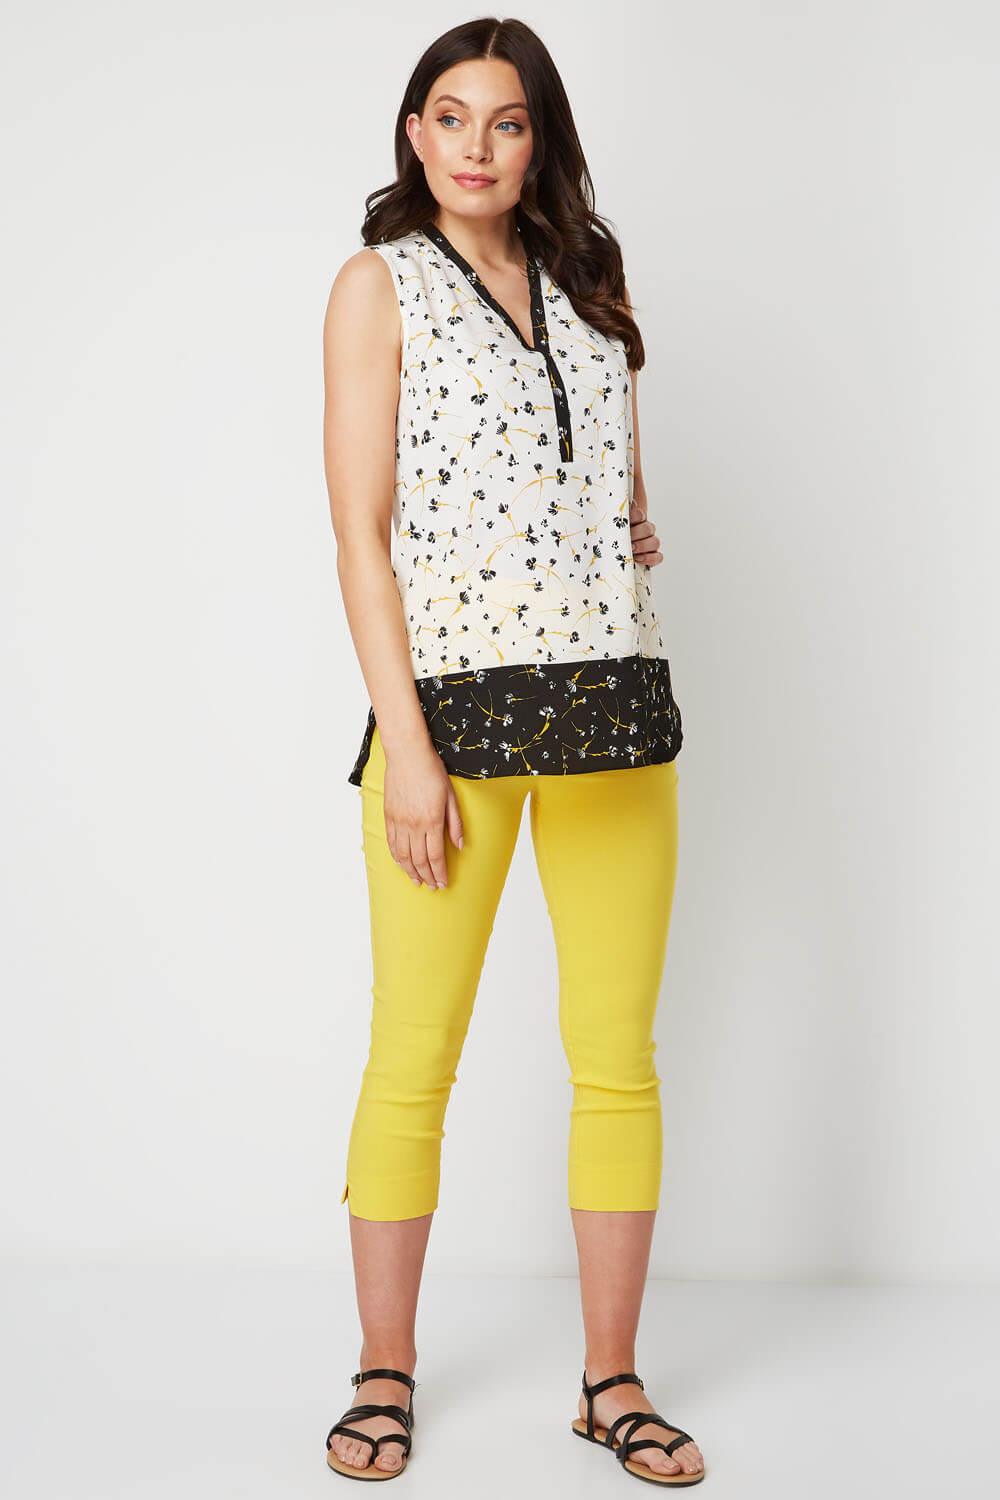 Ivory  Floral Contrast Border Top, Image 2 of 7